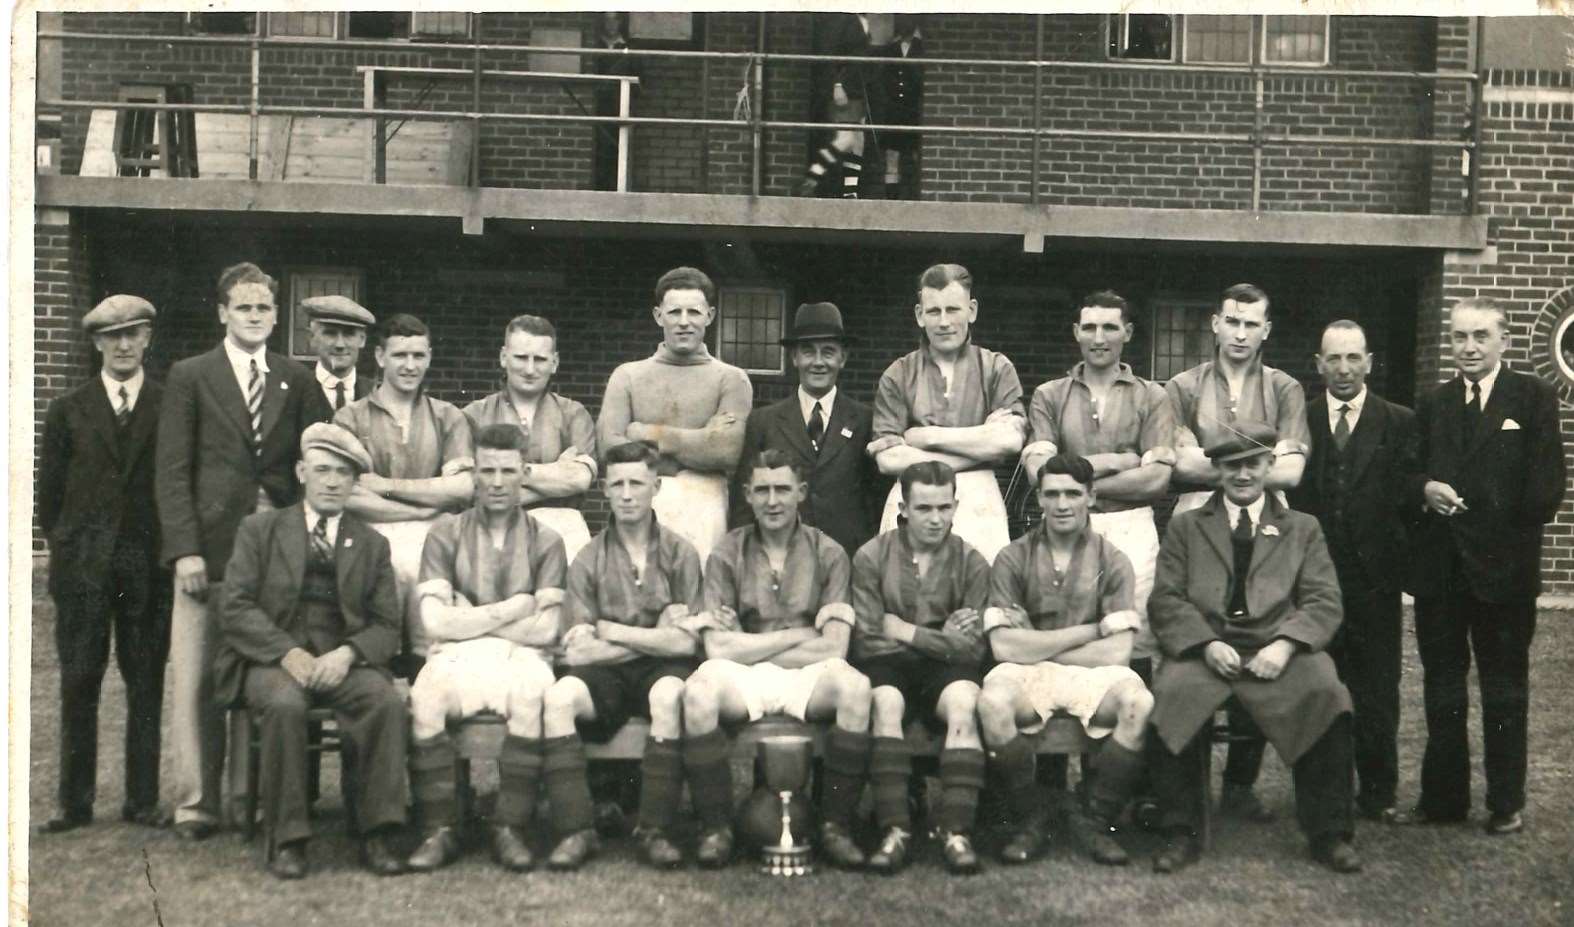 Gravesend United in 1939 at their home ground in Central Avenue/Ascot Road. Man in bowler hat is chairman Bill Tingey. Captain in the centre in Frank Veness (Roger Bowen's uncle). Other men might be Jack Morris, Ginger Nightingale and George and Vic Annal (brothers)